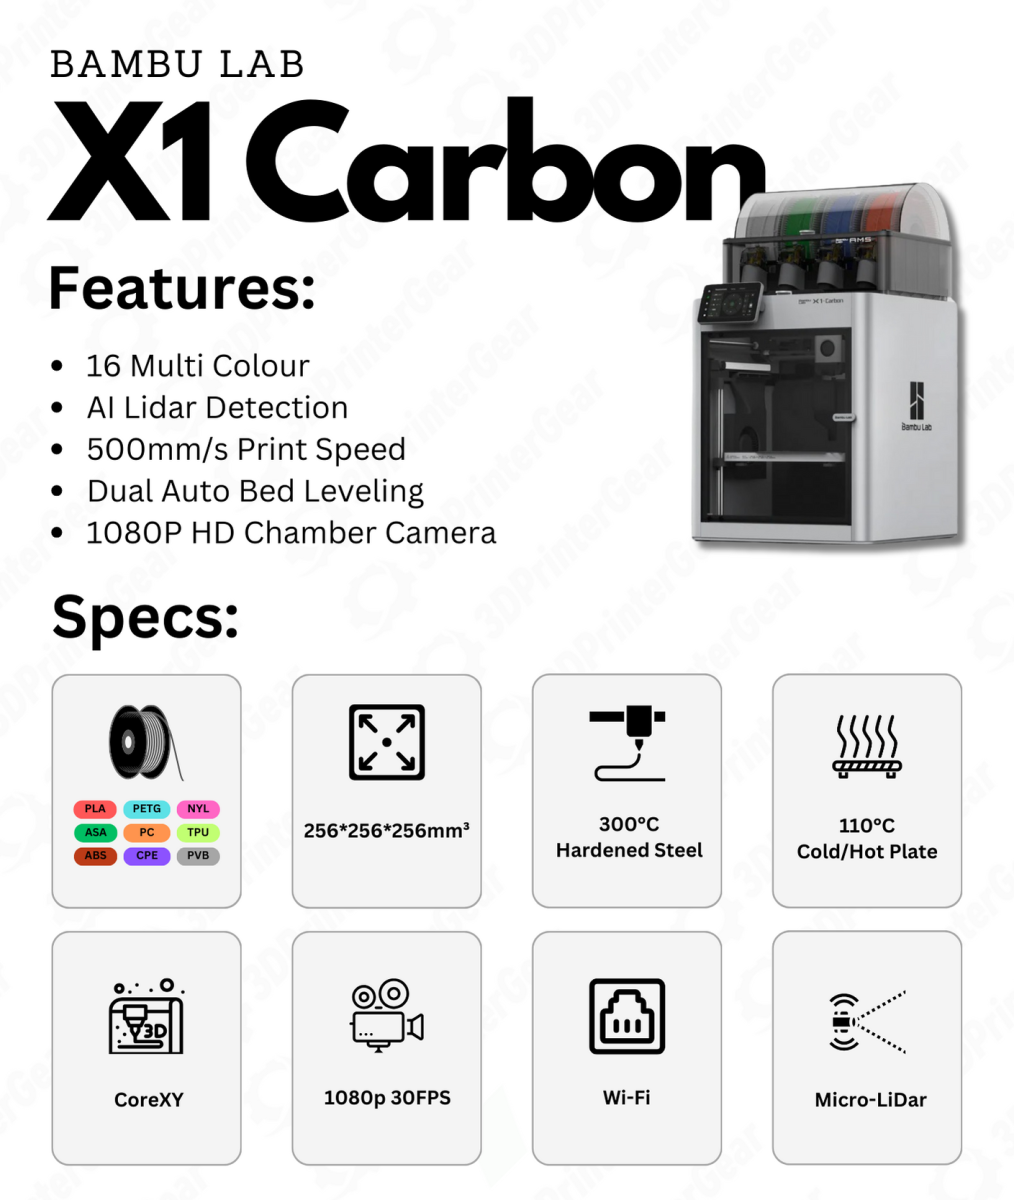 Bambu Lab X1 Carbon Product Specifications